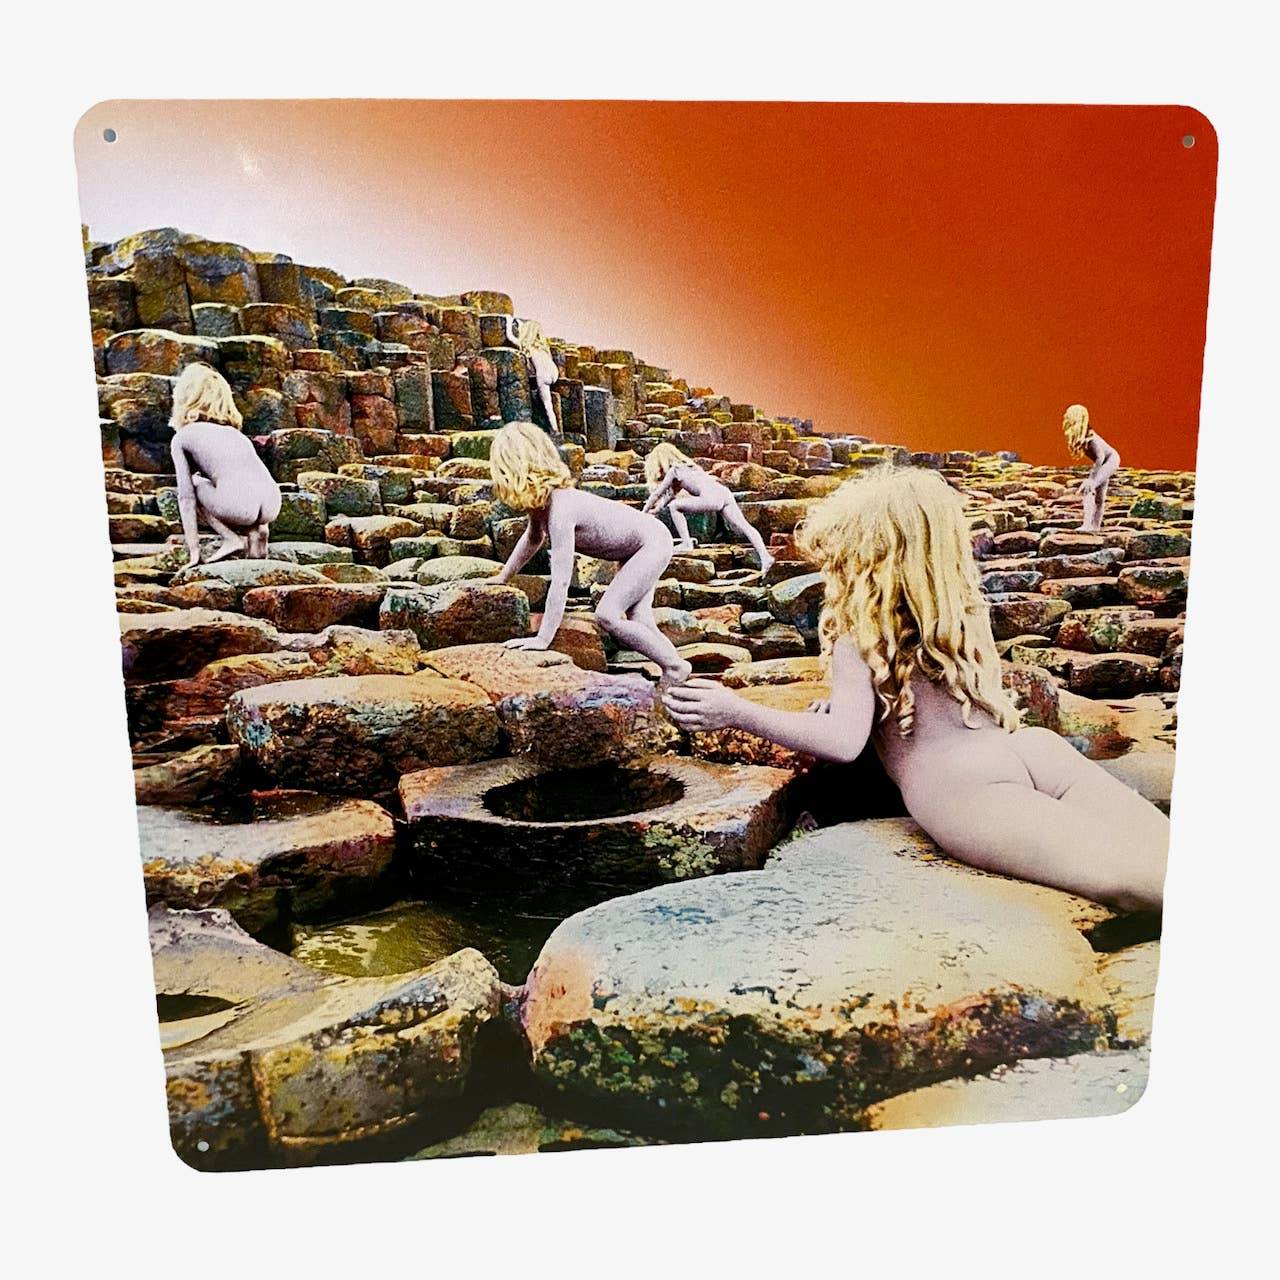 Led Zeppelin - Houses of the Holy Album Cover Metal Print Tin Sign 12"x 12"